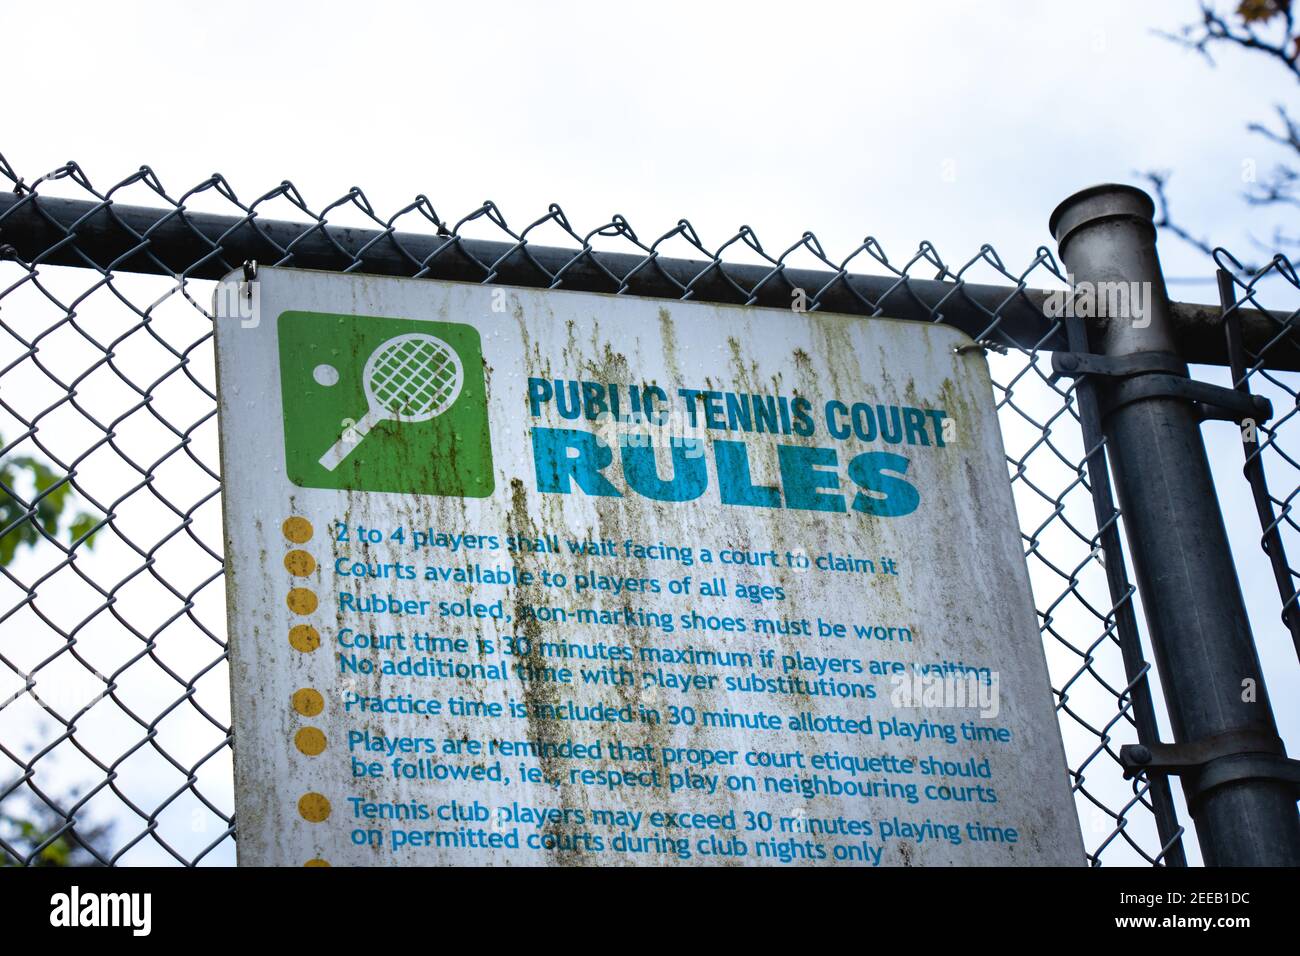 Vancouver, Canada  - May 17, 2020: View of sign Public Tennis Court Rules on a fence in Stanley Park Stock Photo